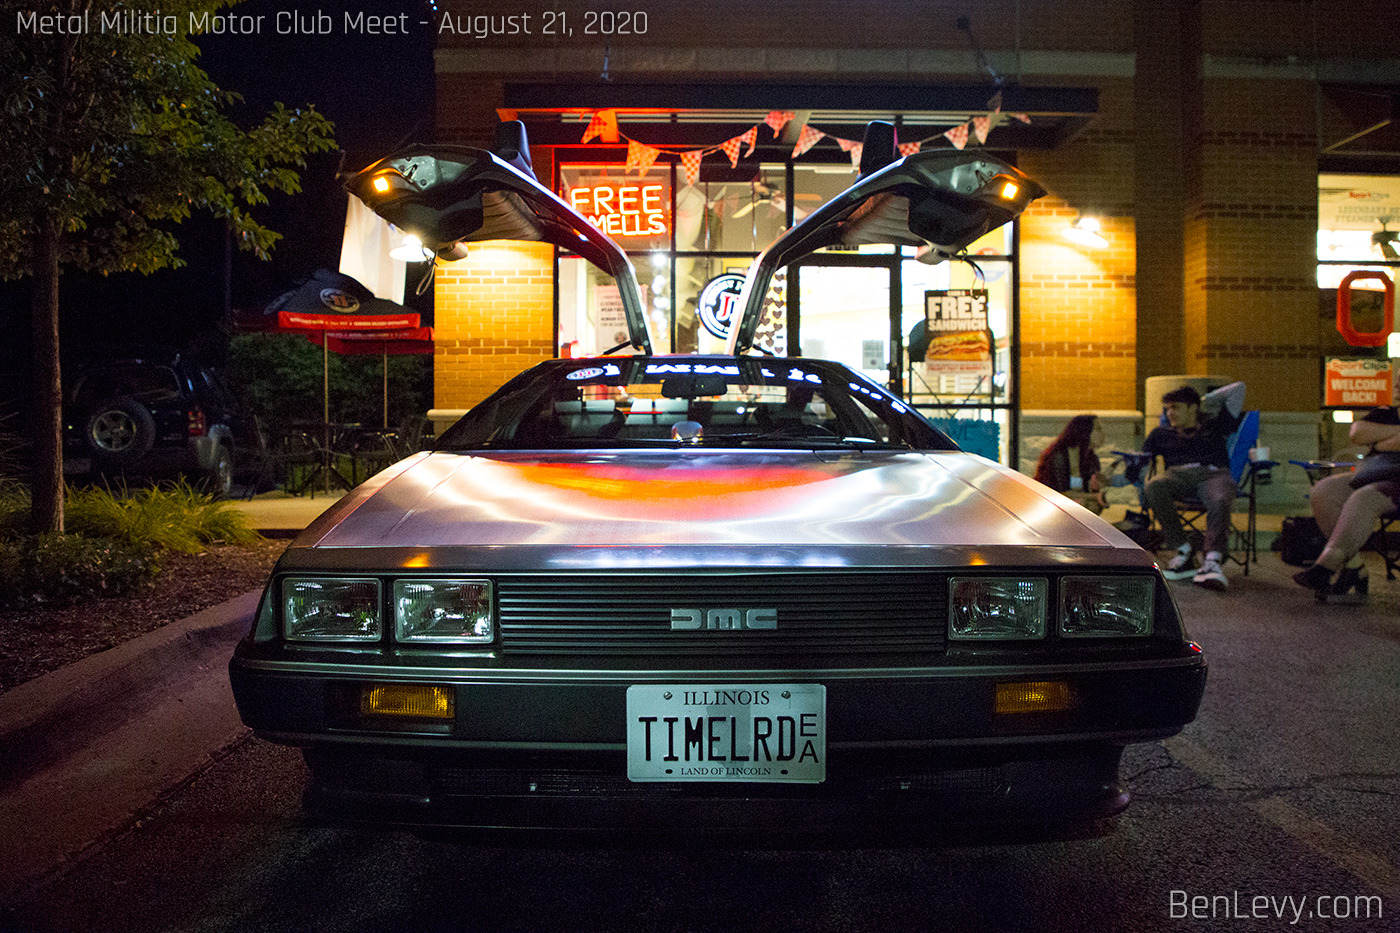 Timelord DeLorean with it's doors up